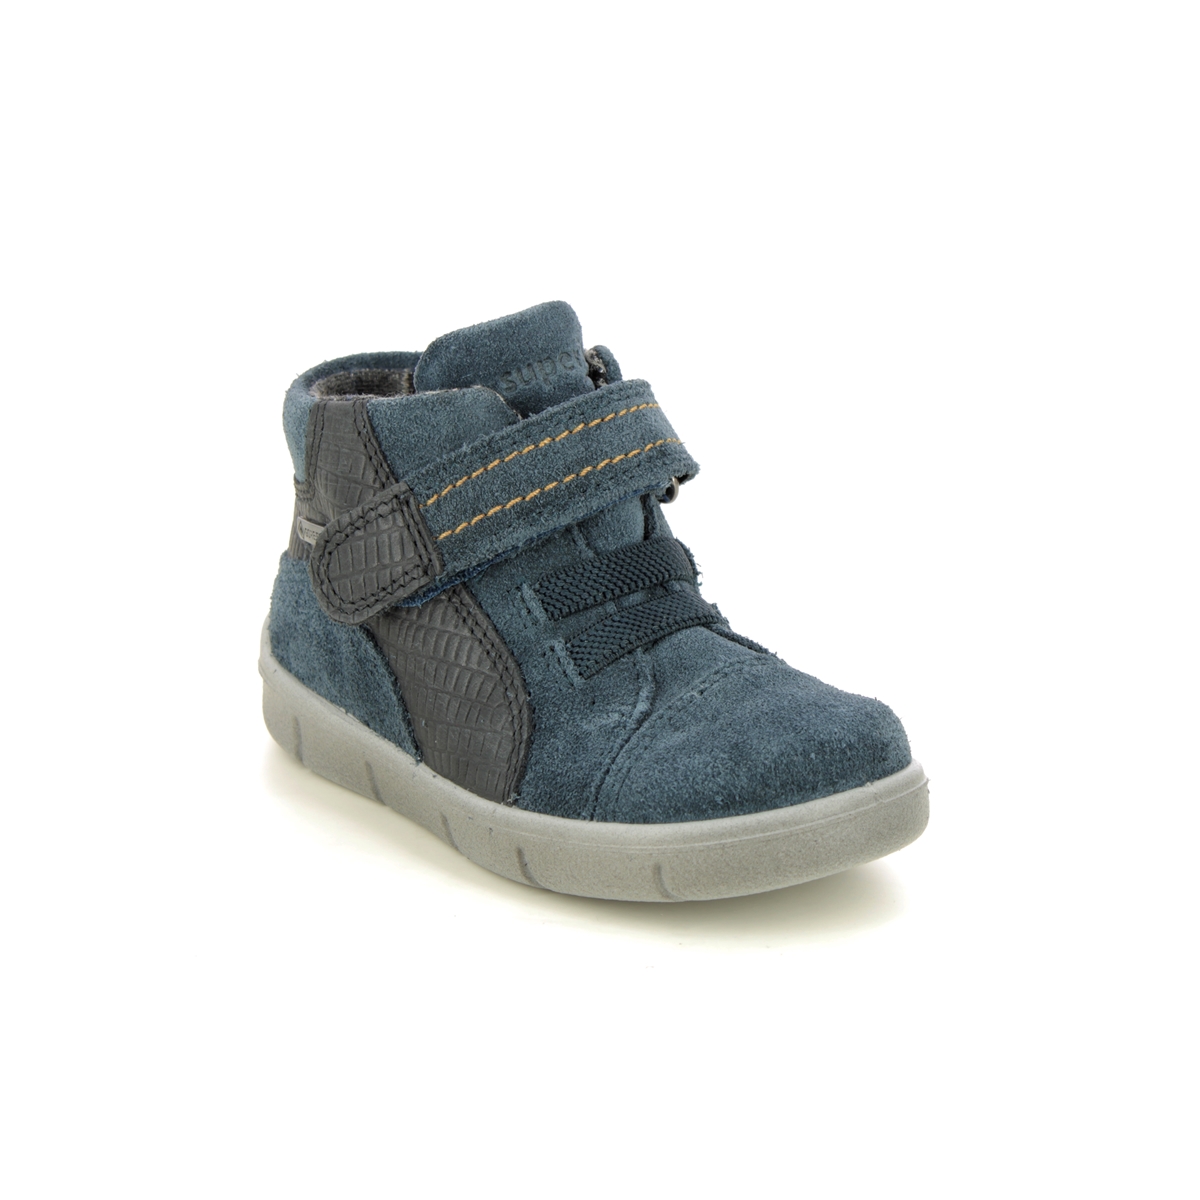 Superfit Ulli Bungee Gtx Blue Suede Kids Toddler Boys Boots 1009429-8000 In Size 26 In Plain Blue Suede For kids